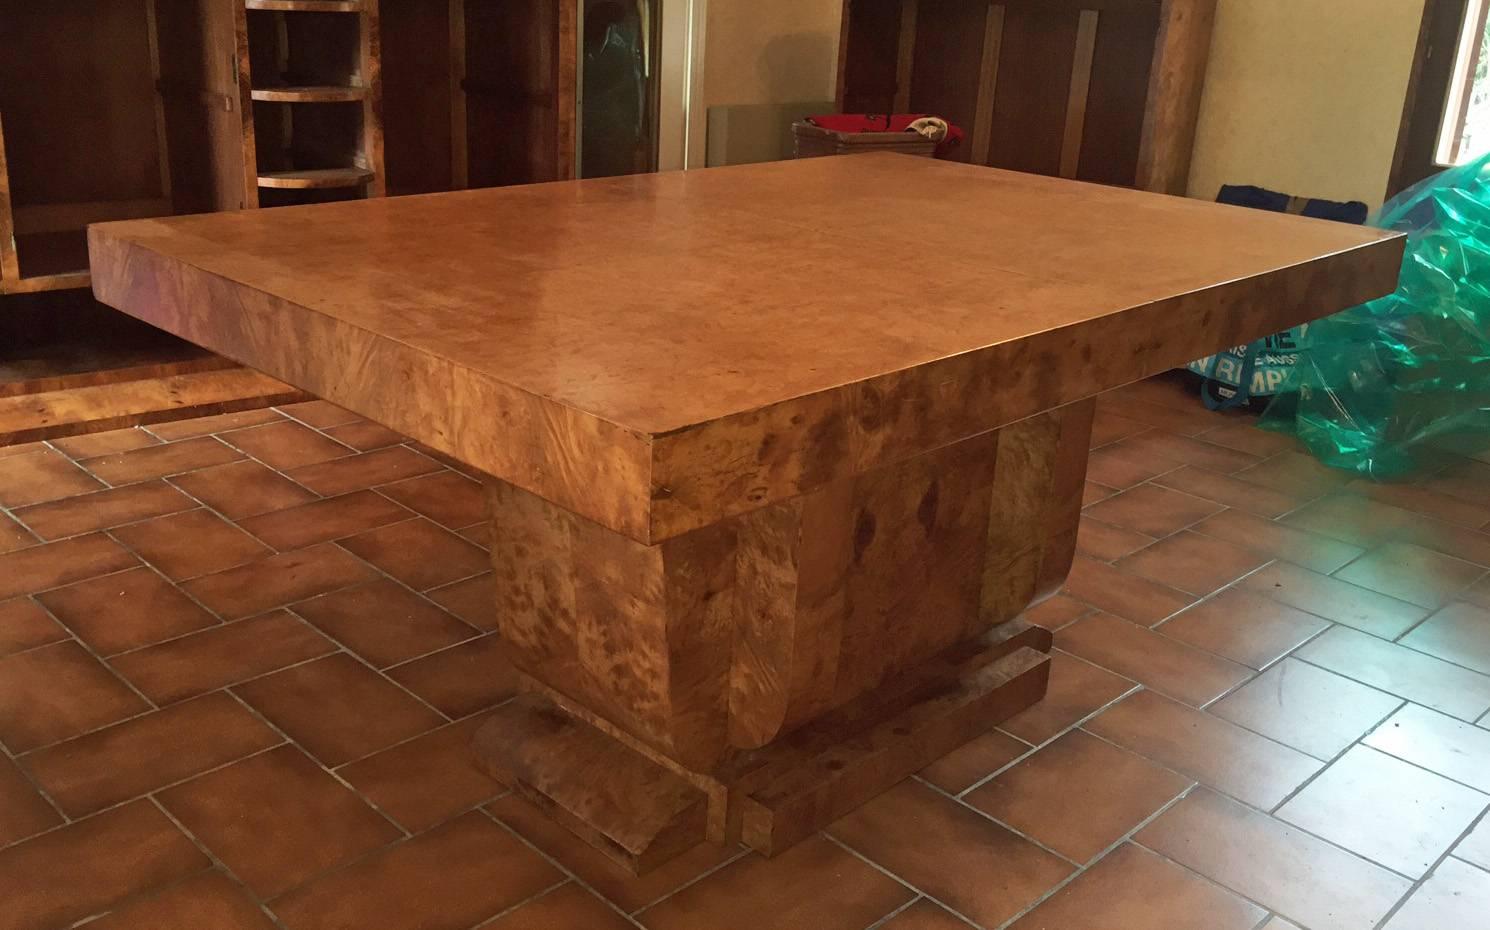 Art Deco burled elm dining room table, 1935.
Three original leaves available (not veneer).
Complete dining room set available.
73 X 156 X 100 cm.
73 X 300 X 100 cm.